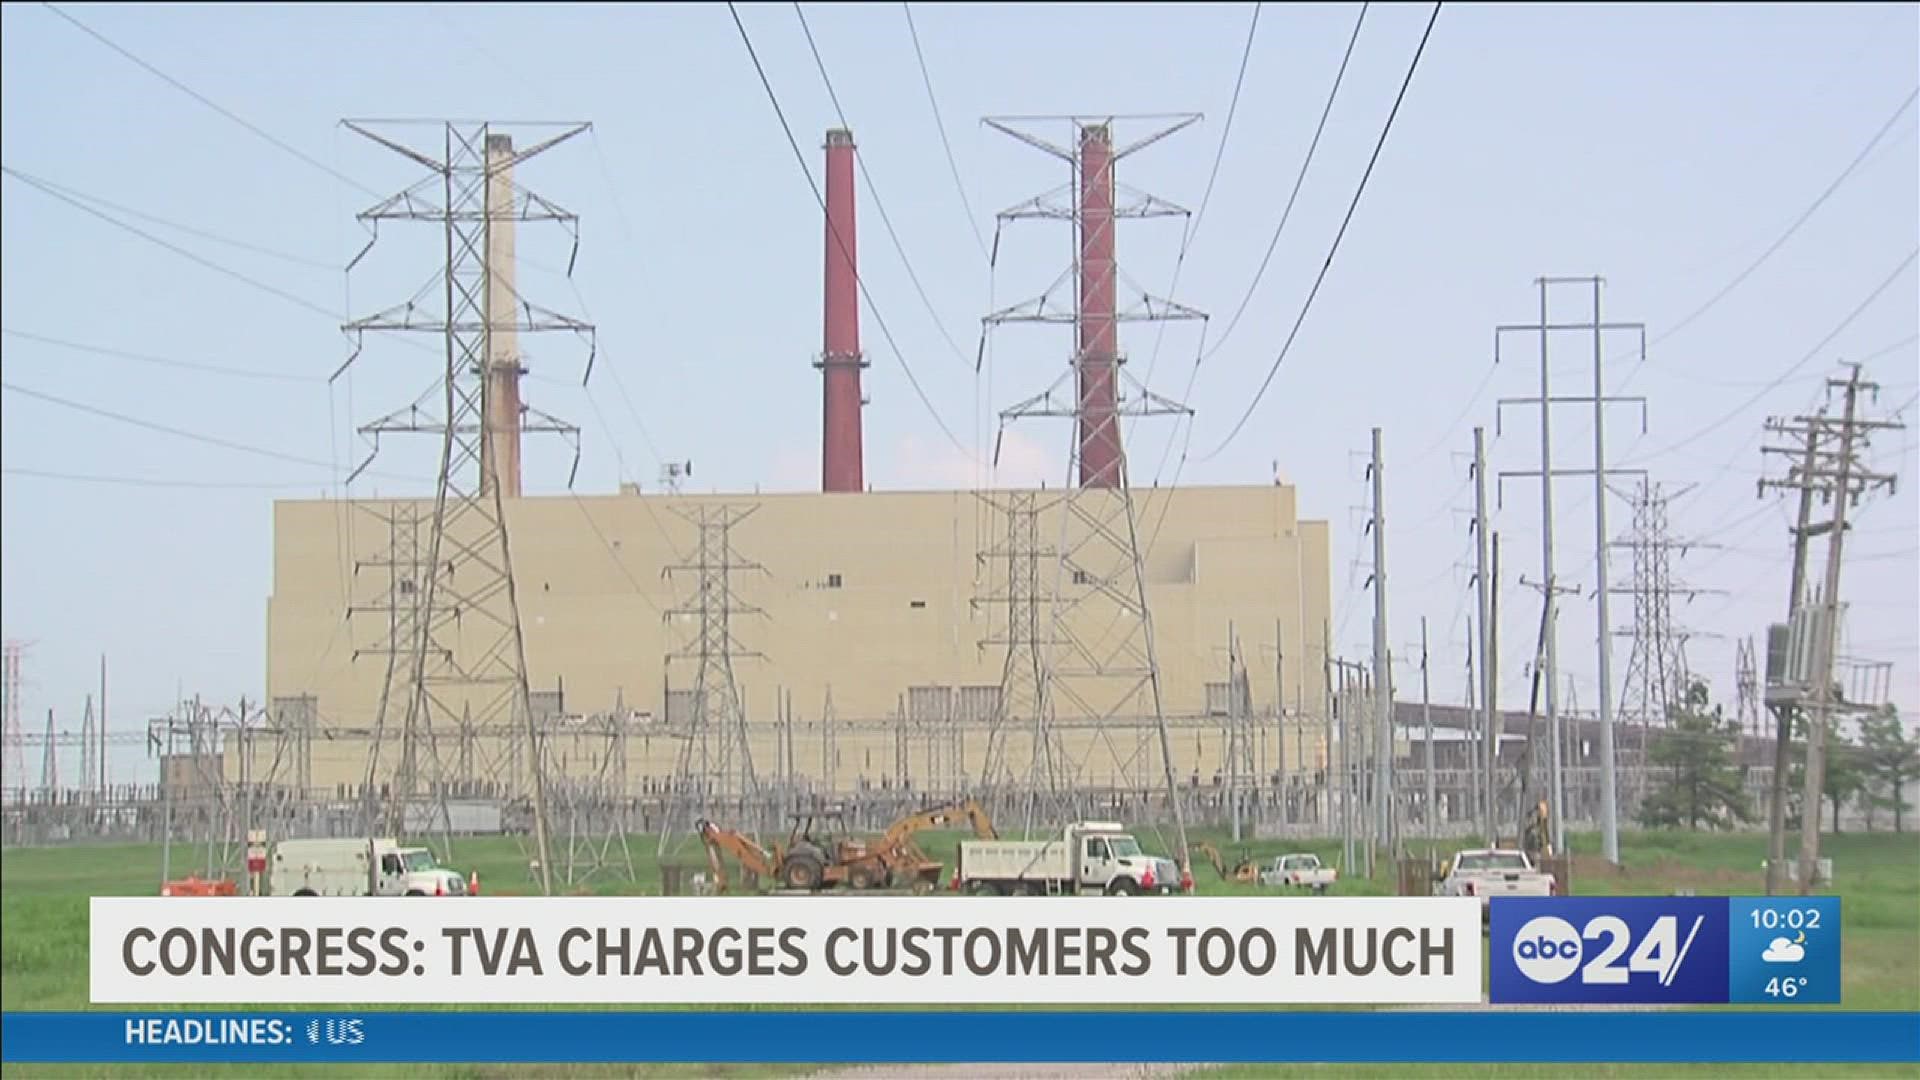 Congress sent a letter to the CEO of the Tennessee Valley Authority, the company that has been providing electricity to Memphians for over 80 years